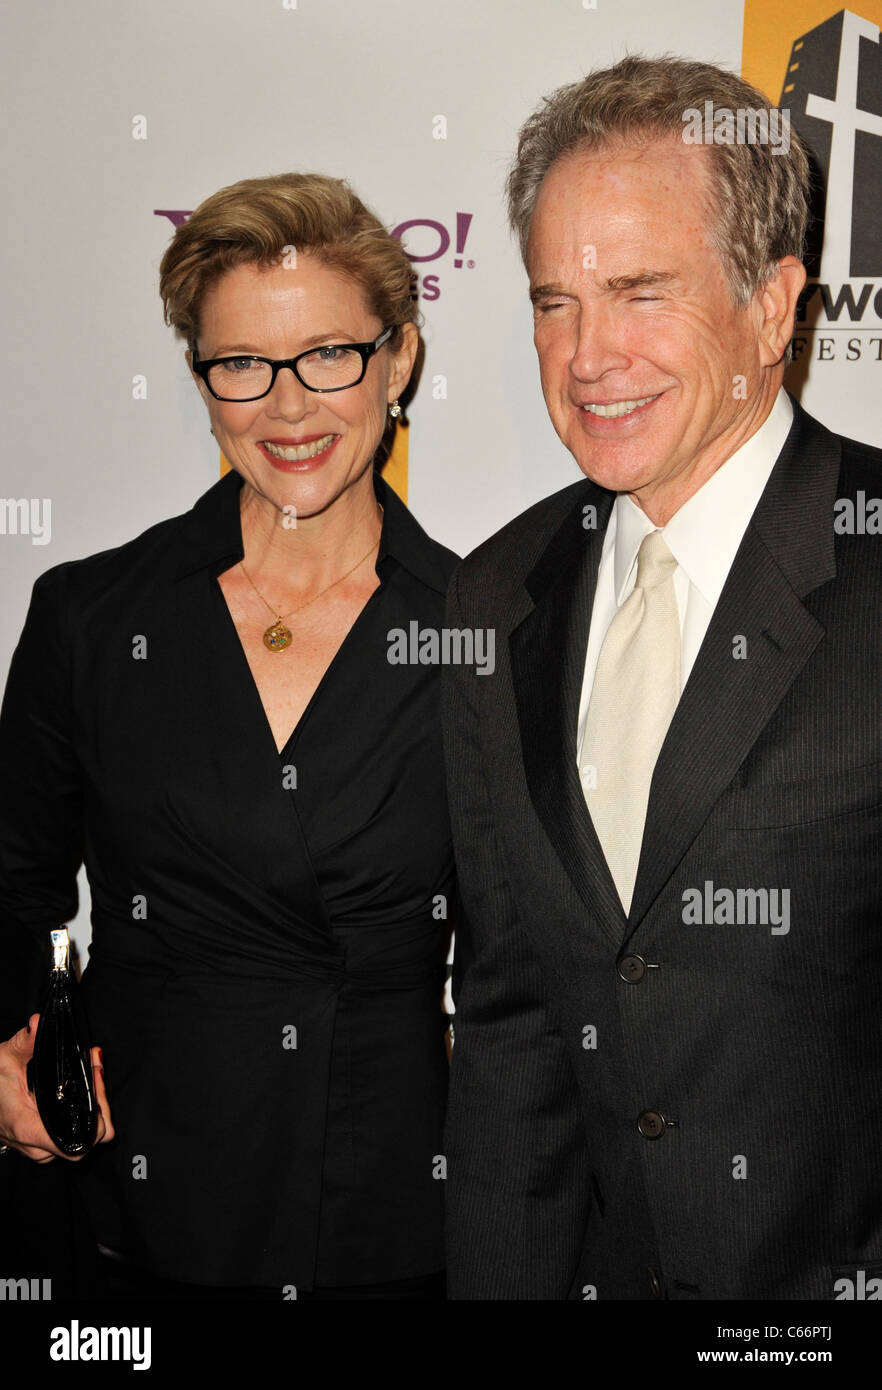 Annette Benning, Warren Beatty at arrivals for 14th Annual Hollywood Film Festival's Hollywood Awards Gala, Beverly Hilton Hotel, Beverly Hills, CA October 25, 2010. Photo By: Robert Kenney/Everett Collection Stock Photo